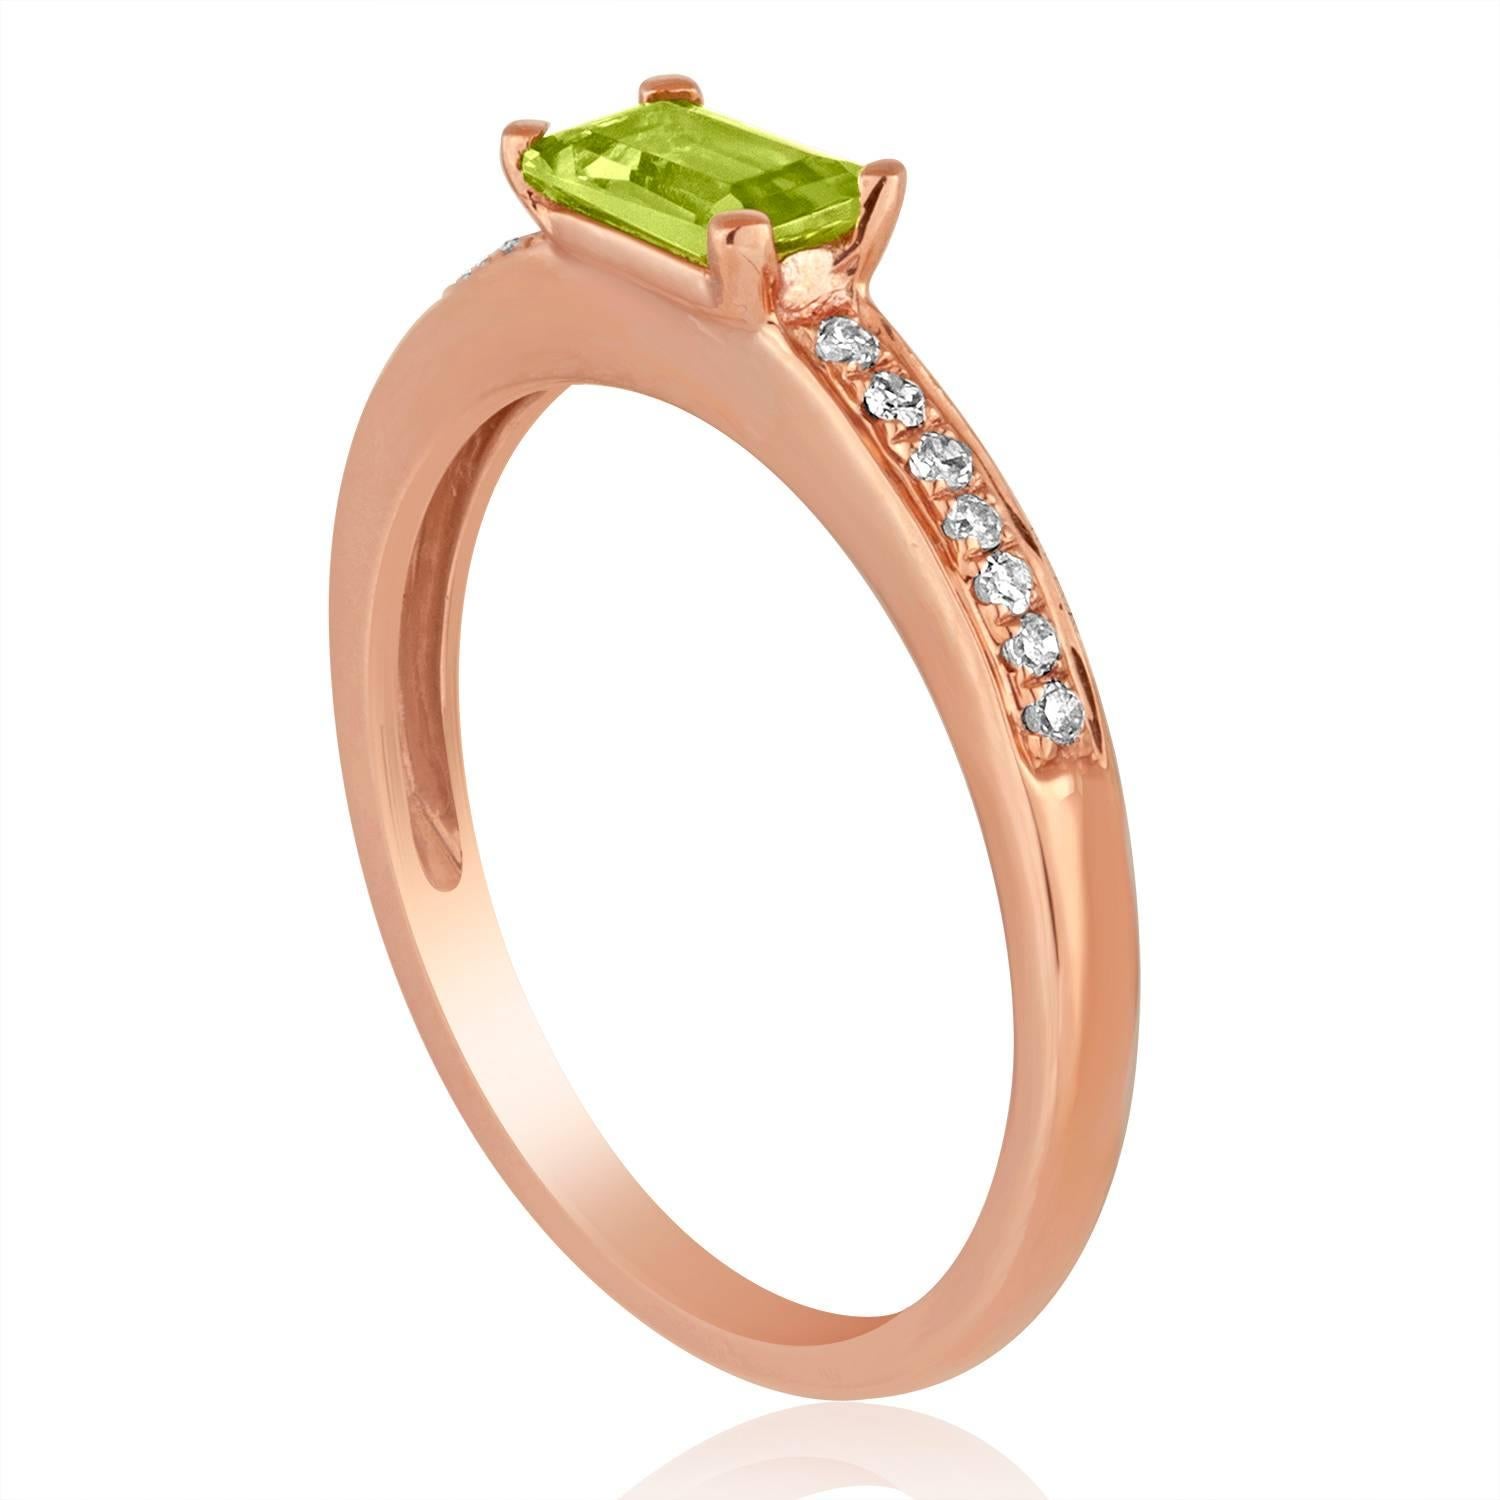 Stackable Peridot Baguette Ring
The ring is 14K Rose Gold
There are 0.09 Carats In Diamonds H SI
The Center Stone is a Peridot Baguette 0.44 Carats
The top measures 1/4